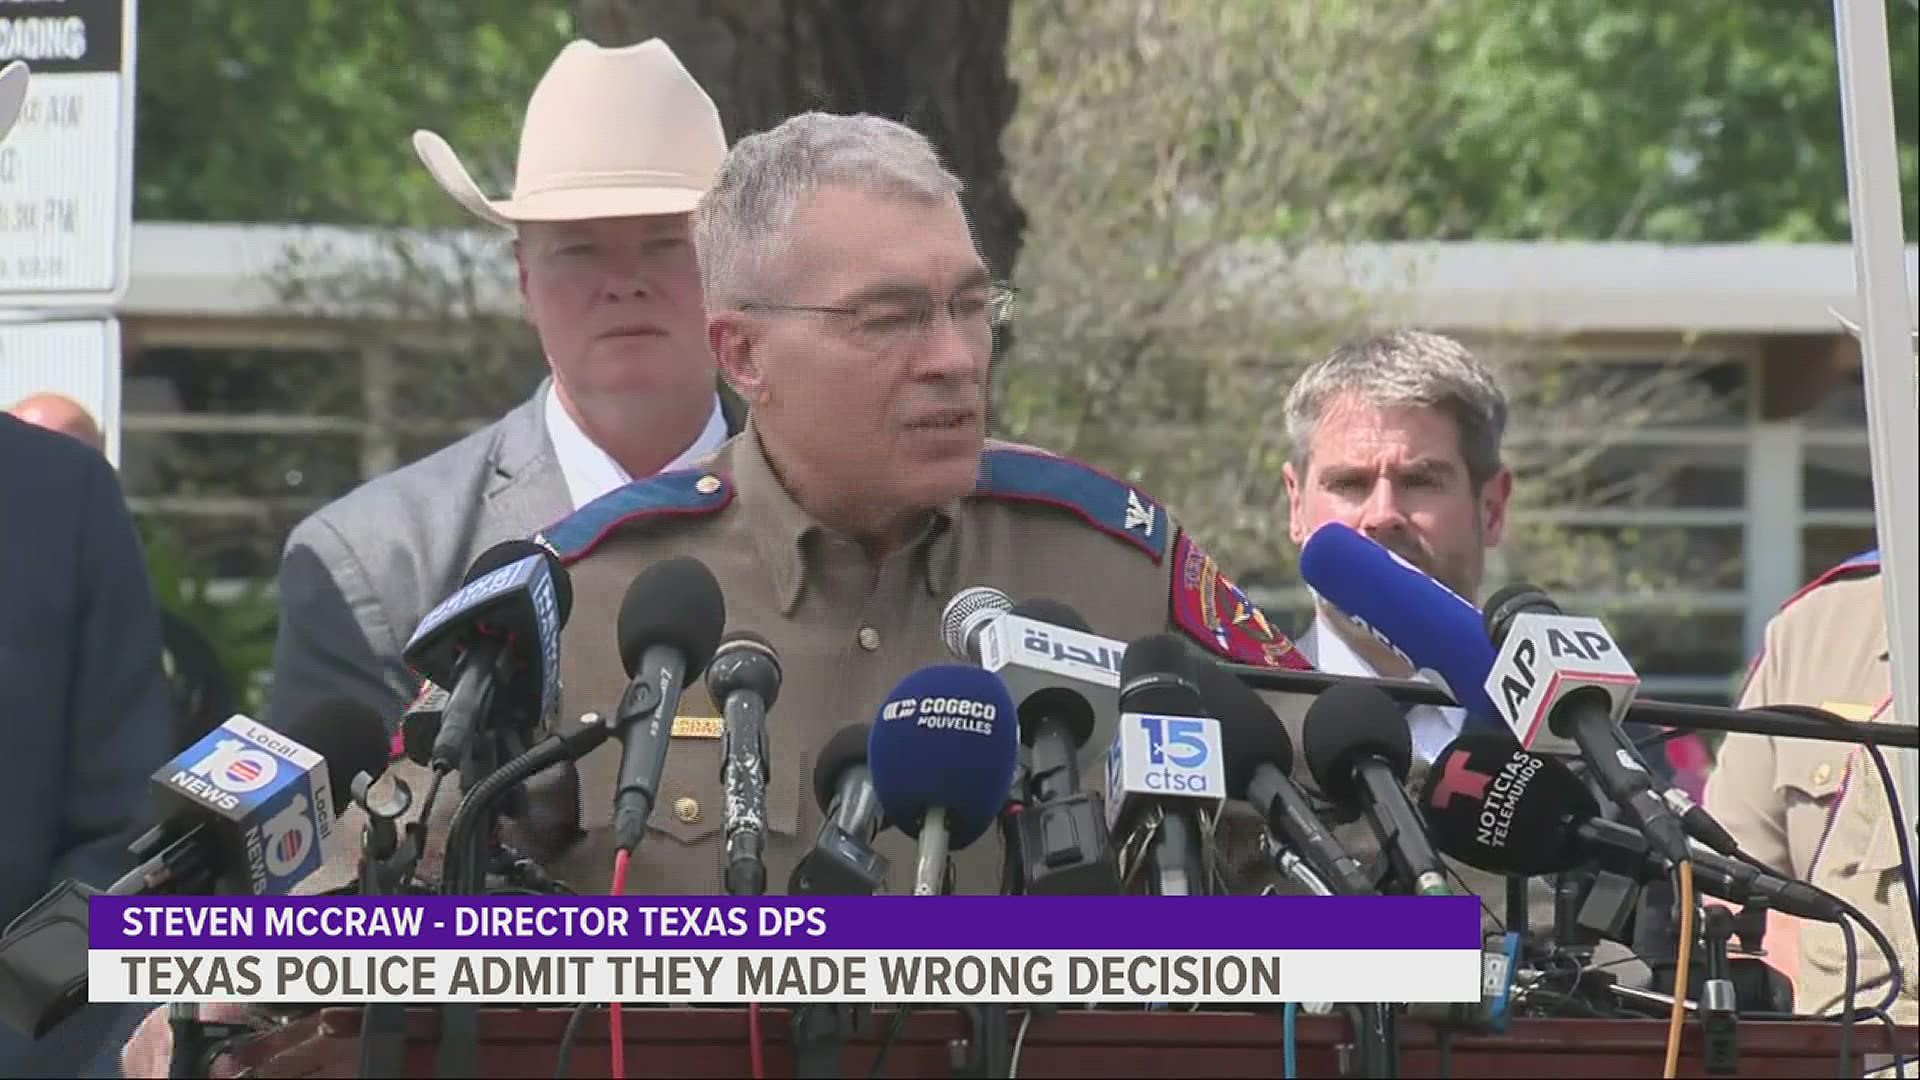 Authorities say the commander at the scene believed the Texas school shooting gunman was barricaded inside the classroom and that the children were not at risk.